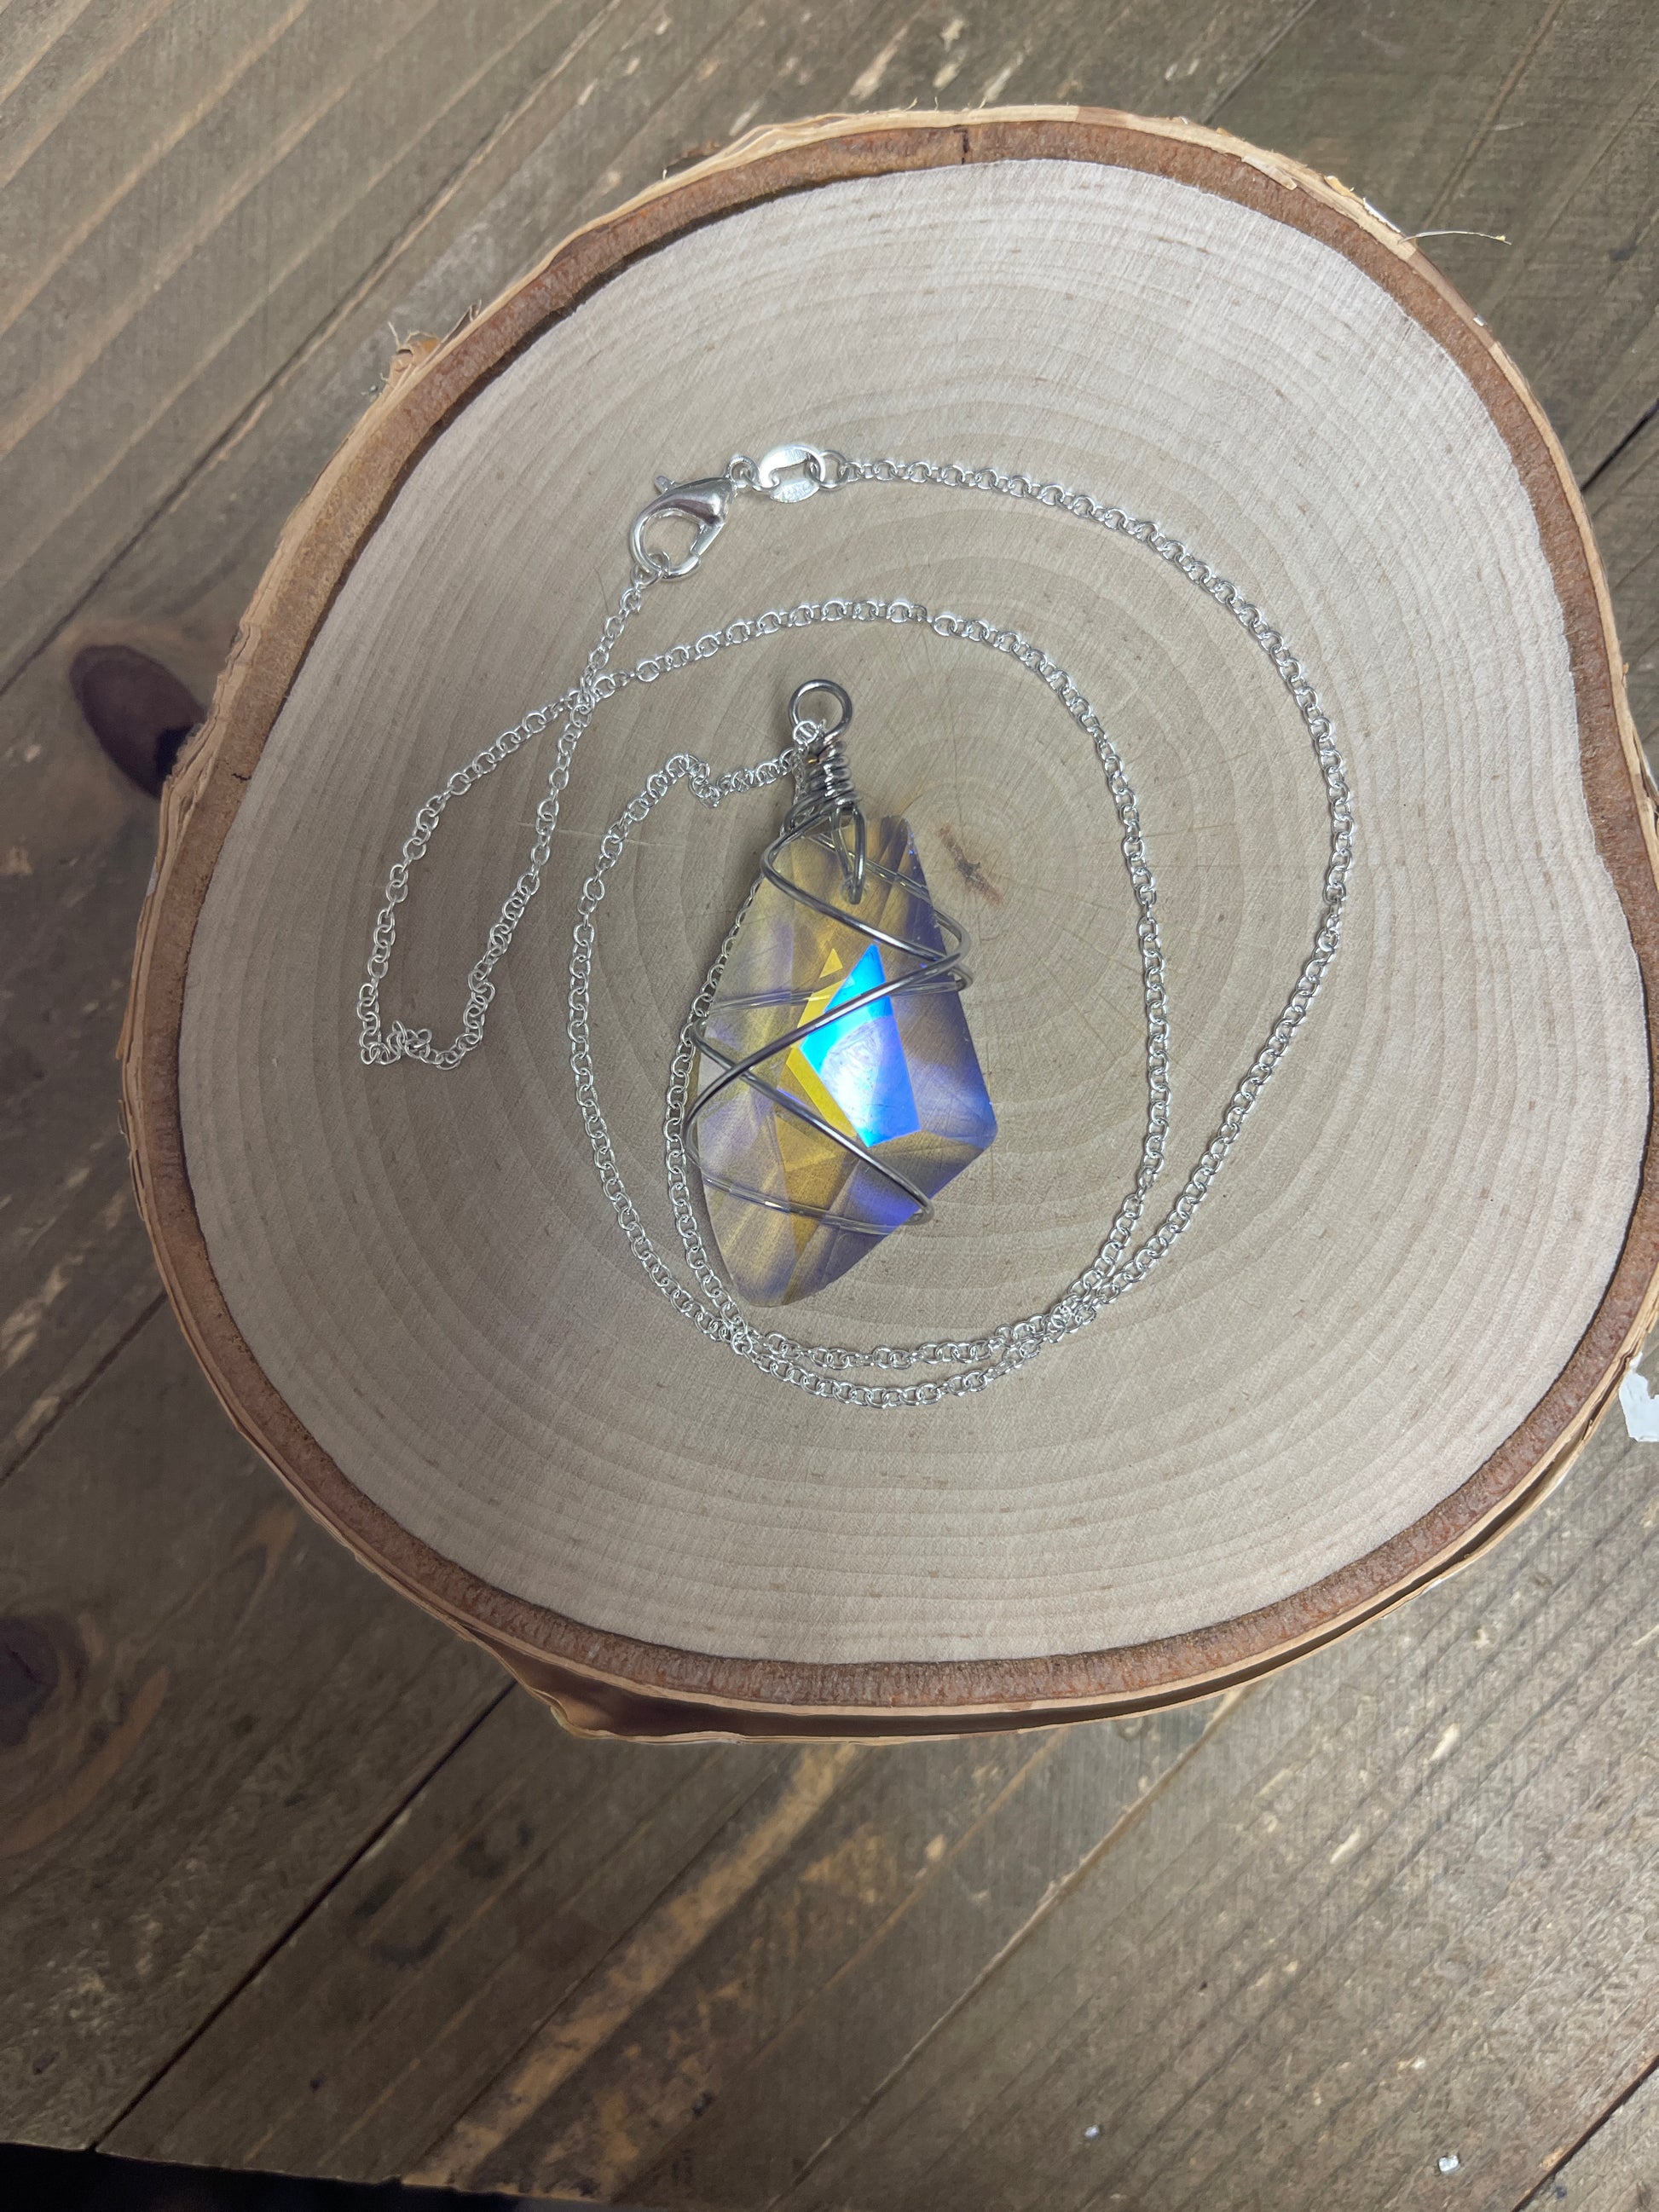 Wire Wrapped Crystal Pendant on a Silver chain NecklacePink tiful of LOVE